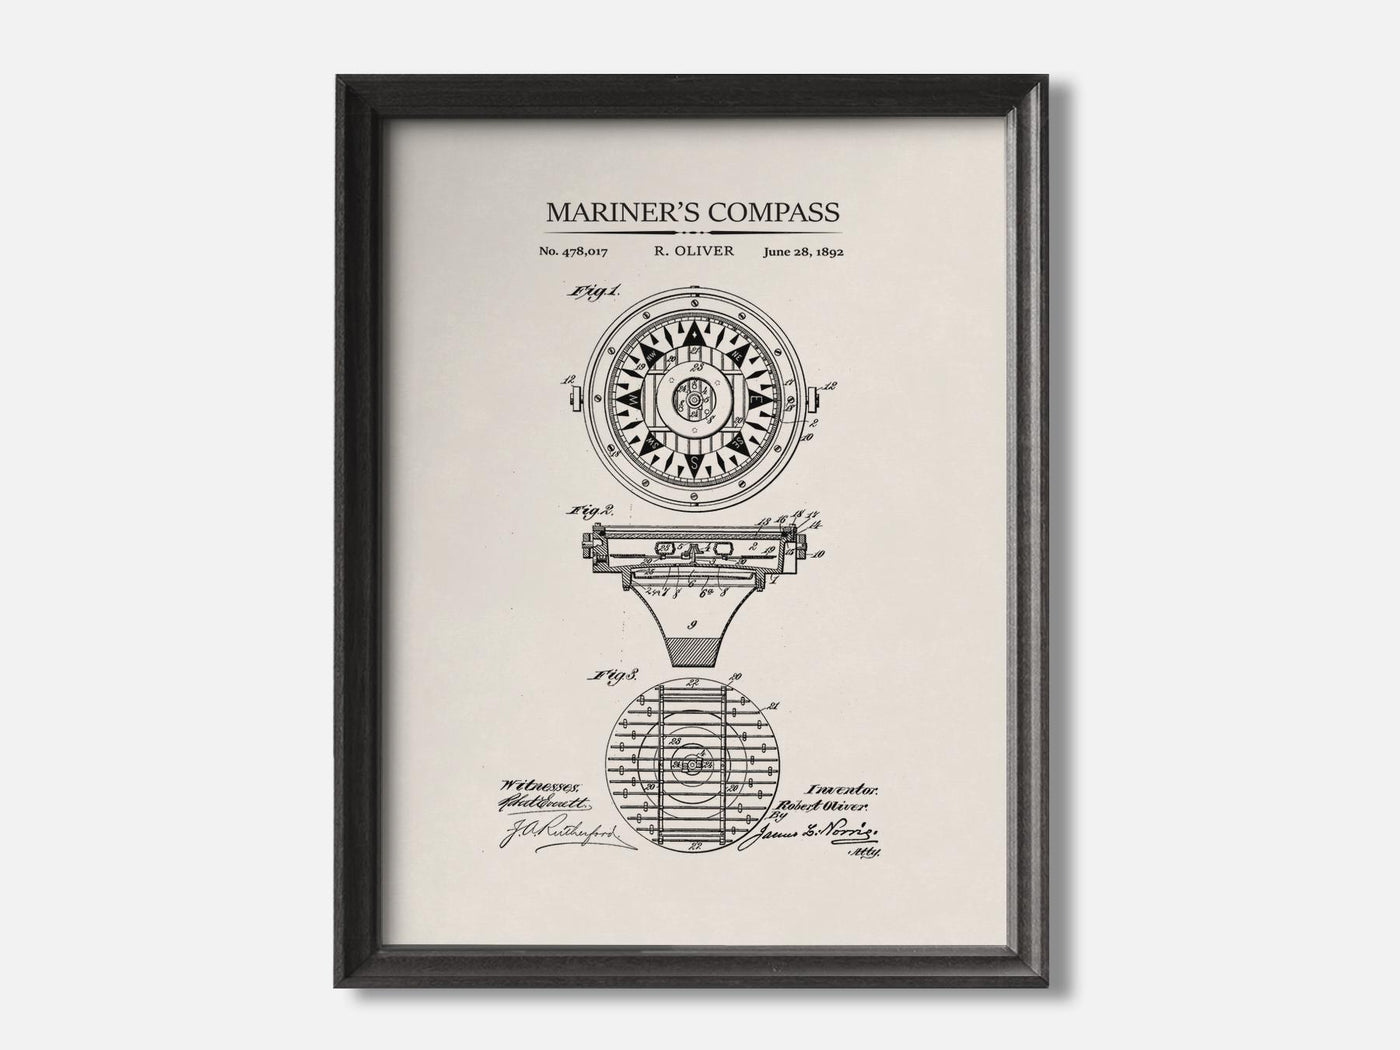 Mariner's Compass Patent Print mockup - A_to5-V1-PC_F+B-SS_1-PS_5x7-C_ivo variant